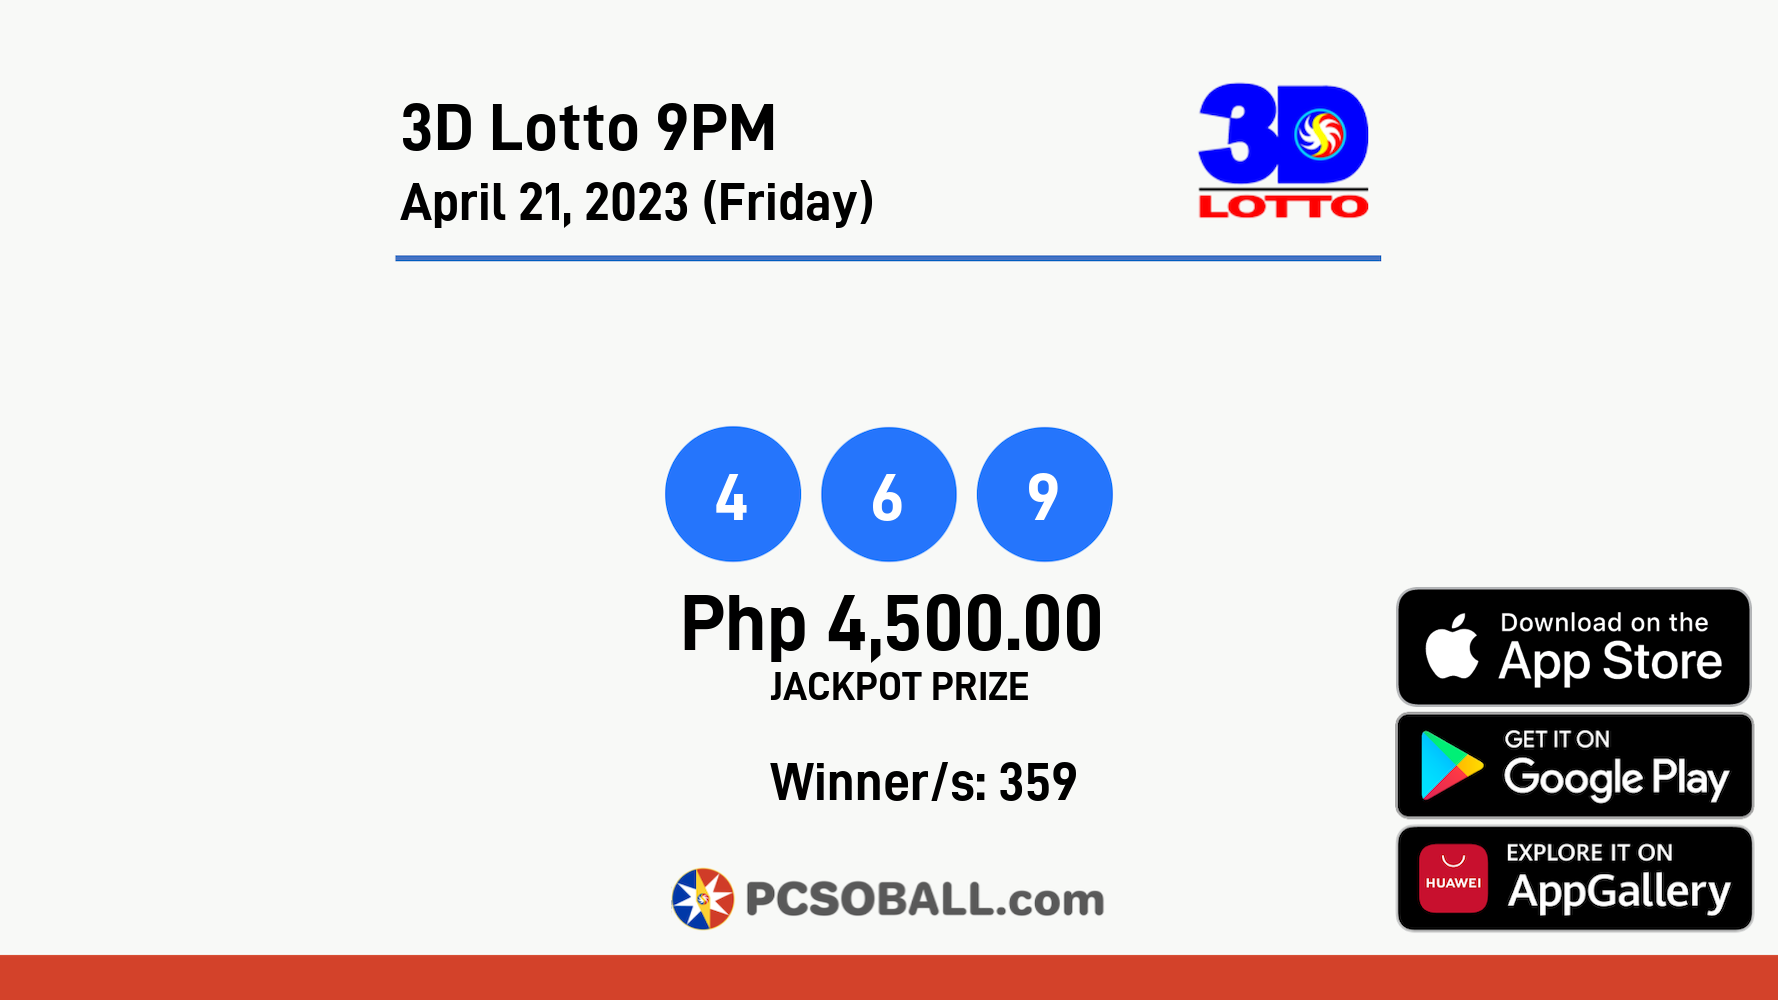 3D Lotto 9PM April 21, 2023 (Friday) Result